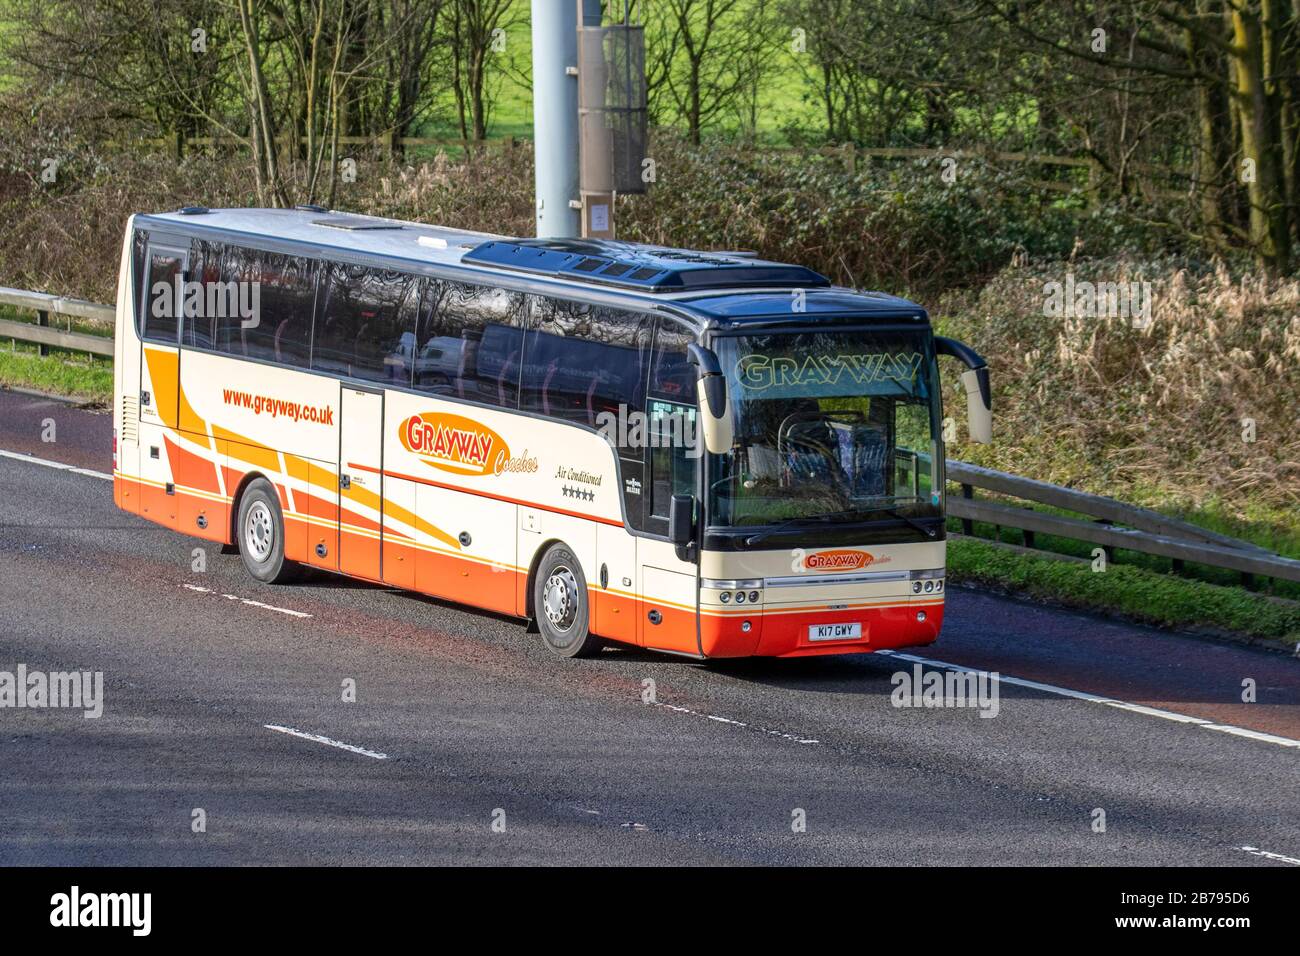 Vdl Bus And Coach High Resolution Stock Photography and Images - Alamy